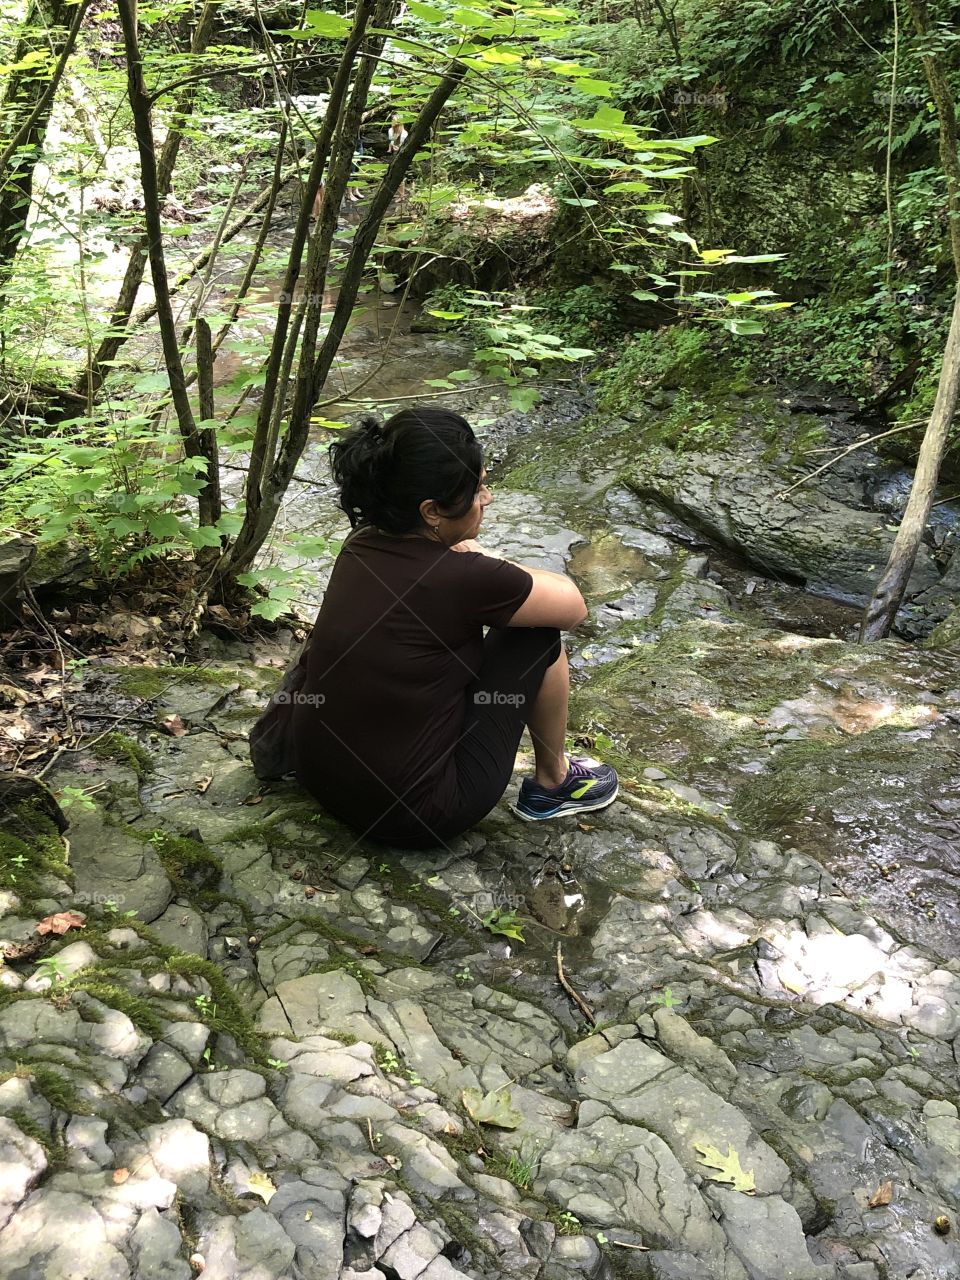 Contemplating in nature